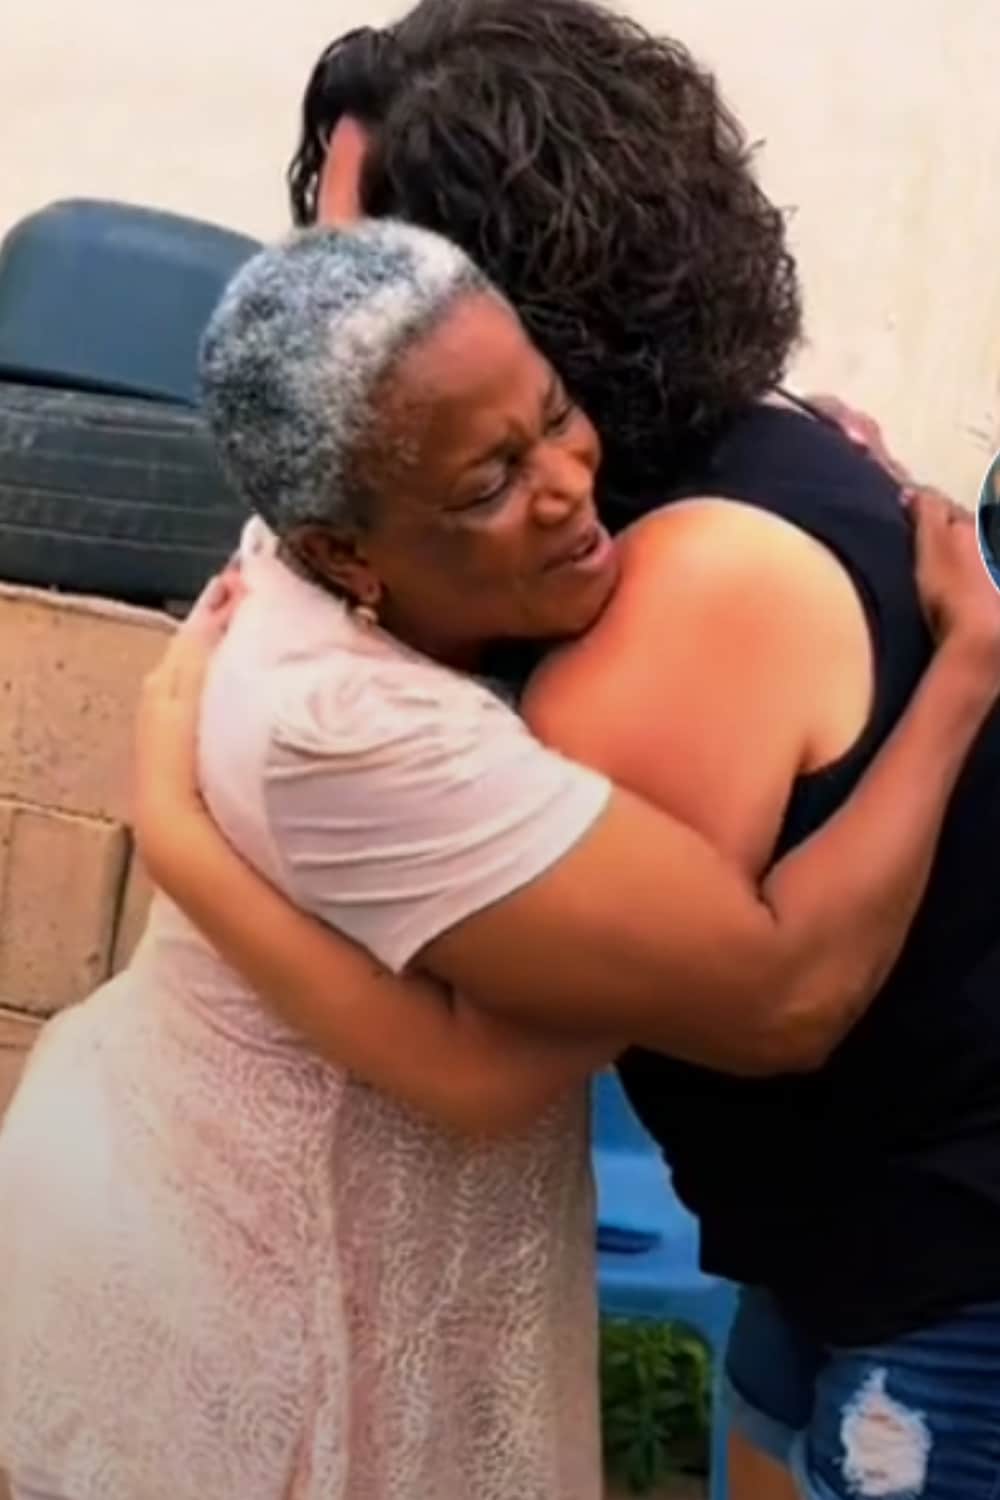 Nigerian woman overwhelmed with joy as son brings home his Oyinbo girlfriend (Video)